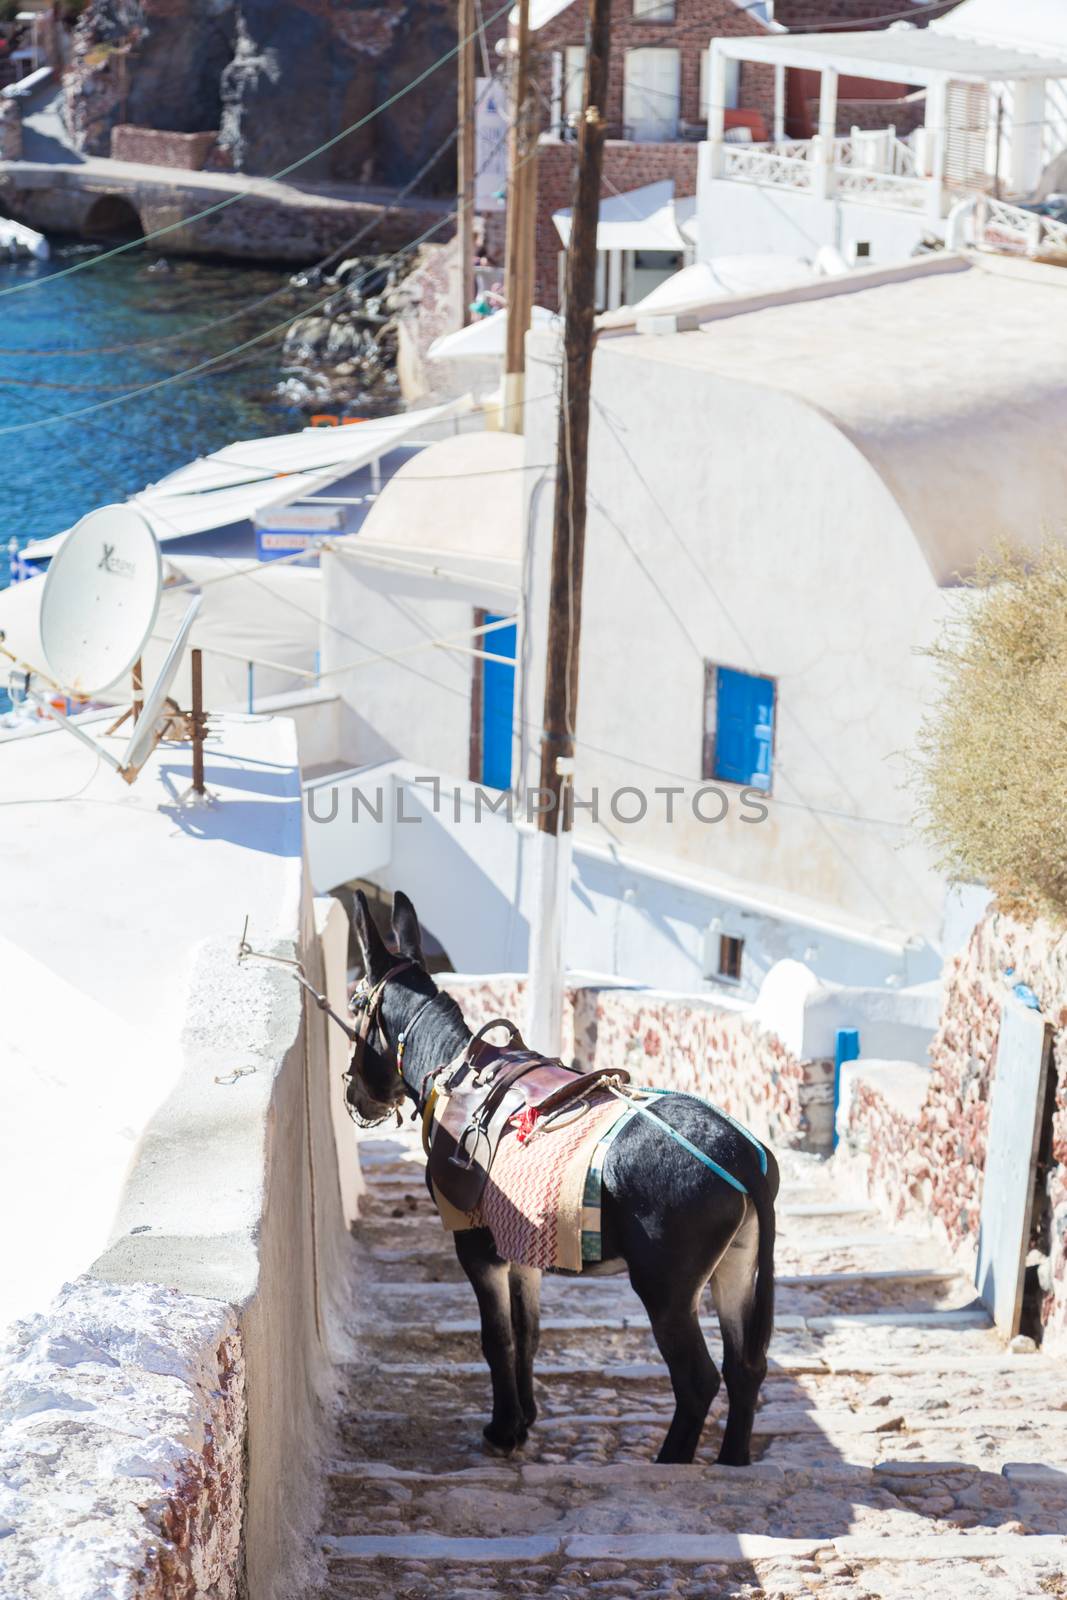 Donkey that works as tourist taxis on the island of Santorini, Cyclades, Greece. by kasto